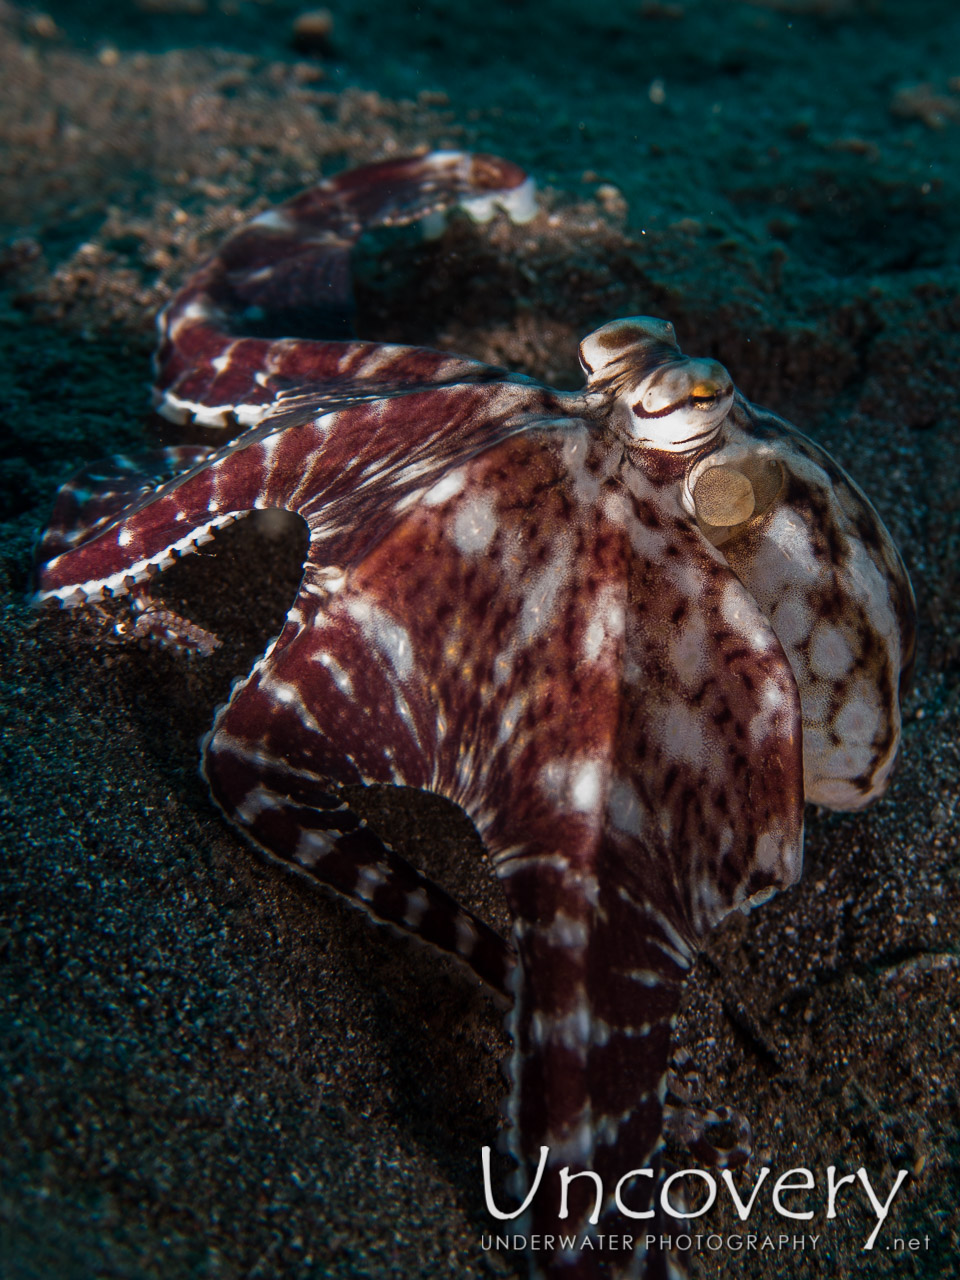 Mimic Octopus (thaumoctopus Mimicus), photo taken in Indonesia, North Sulawesi, Lembeh Strait, Aer Bajo 1